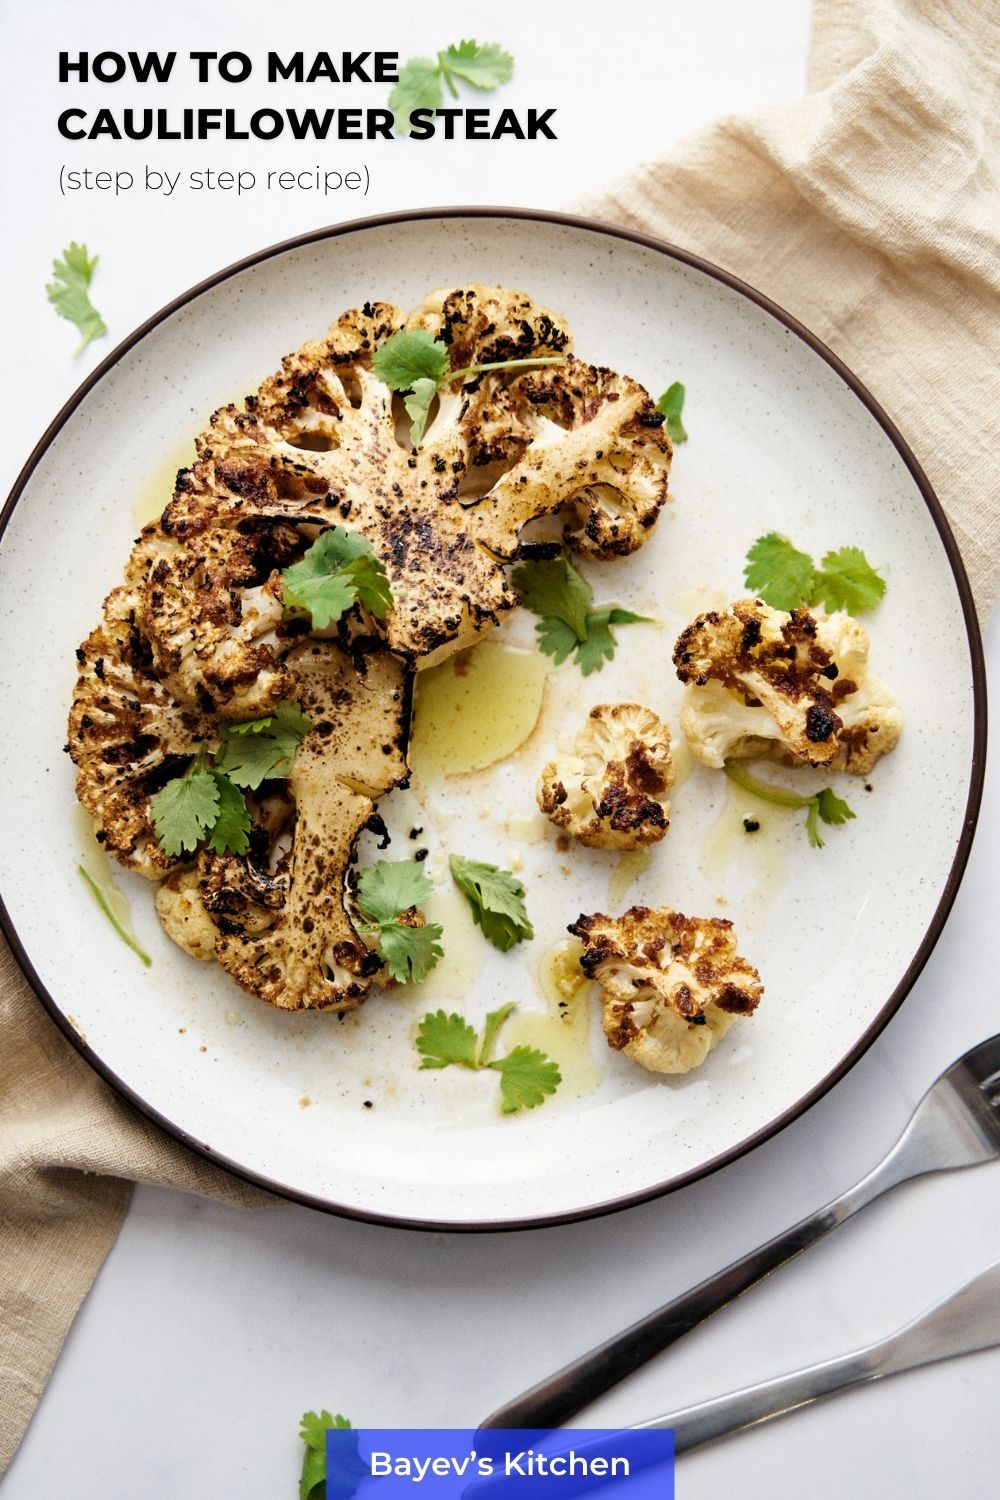 Baked Cauliflower Steak. Cauliflower Steak baked in the oven with lemon juice and zest, Worcester sauce, garlic, onion and smoked paprika. Recipe with step by step Directions